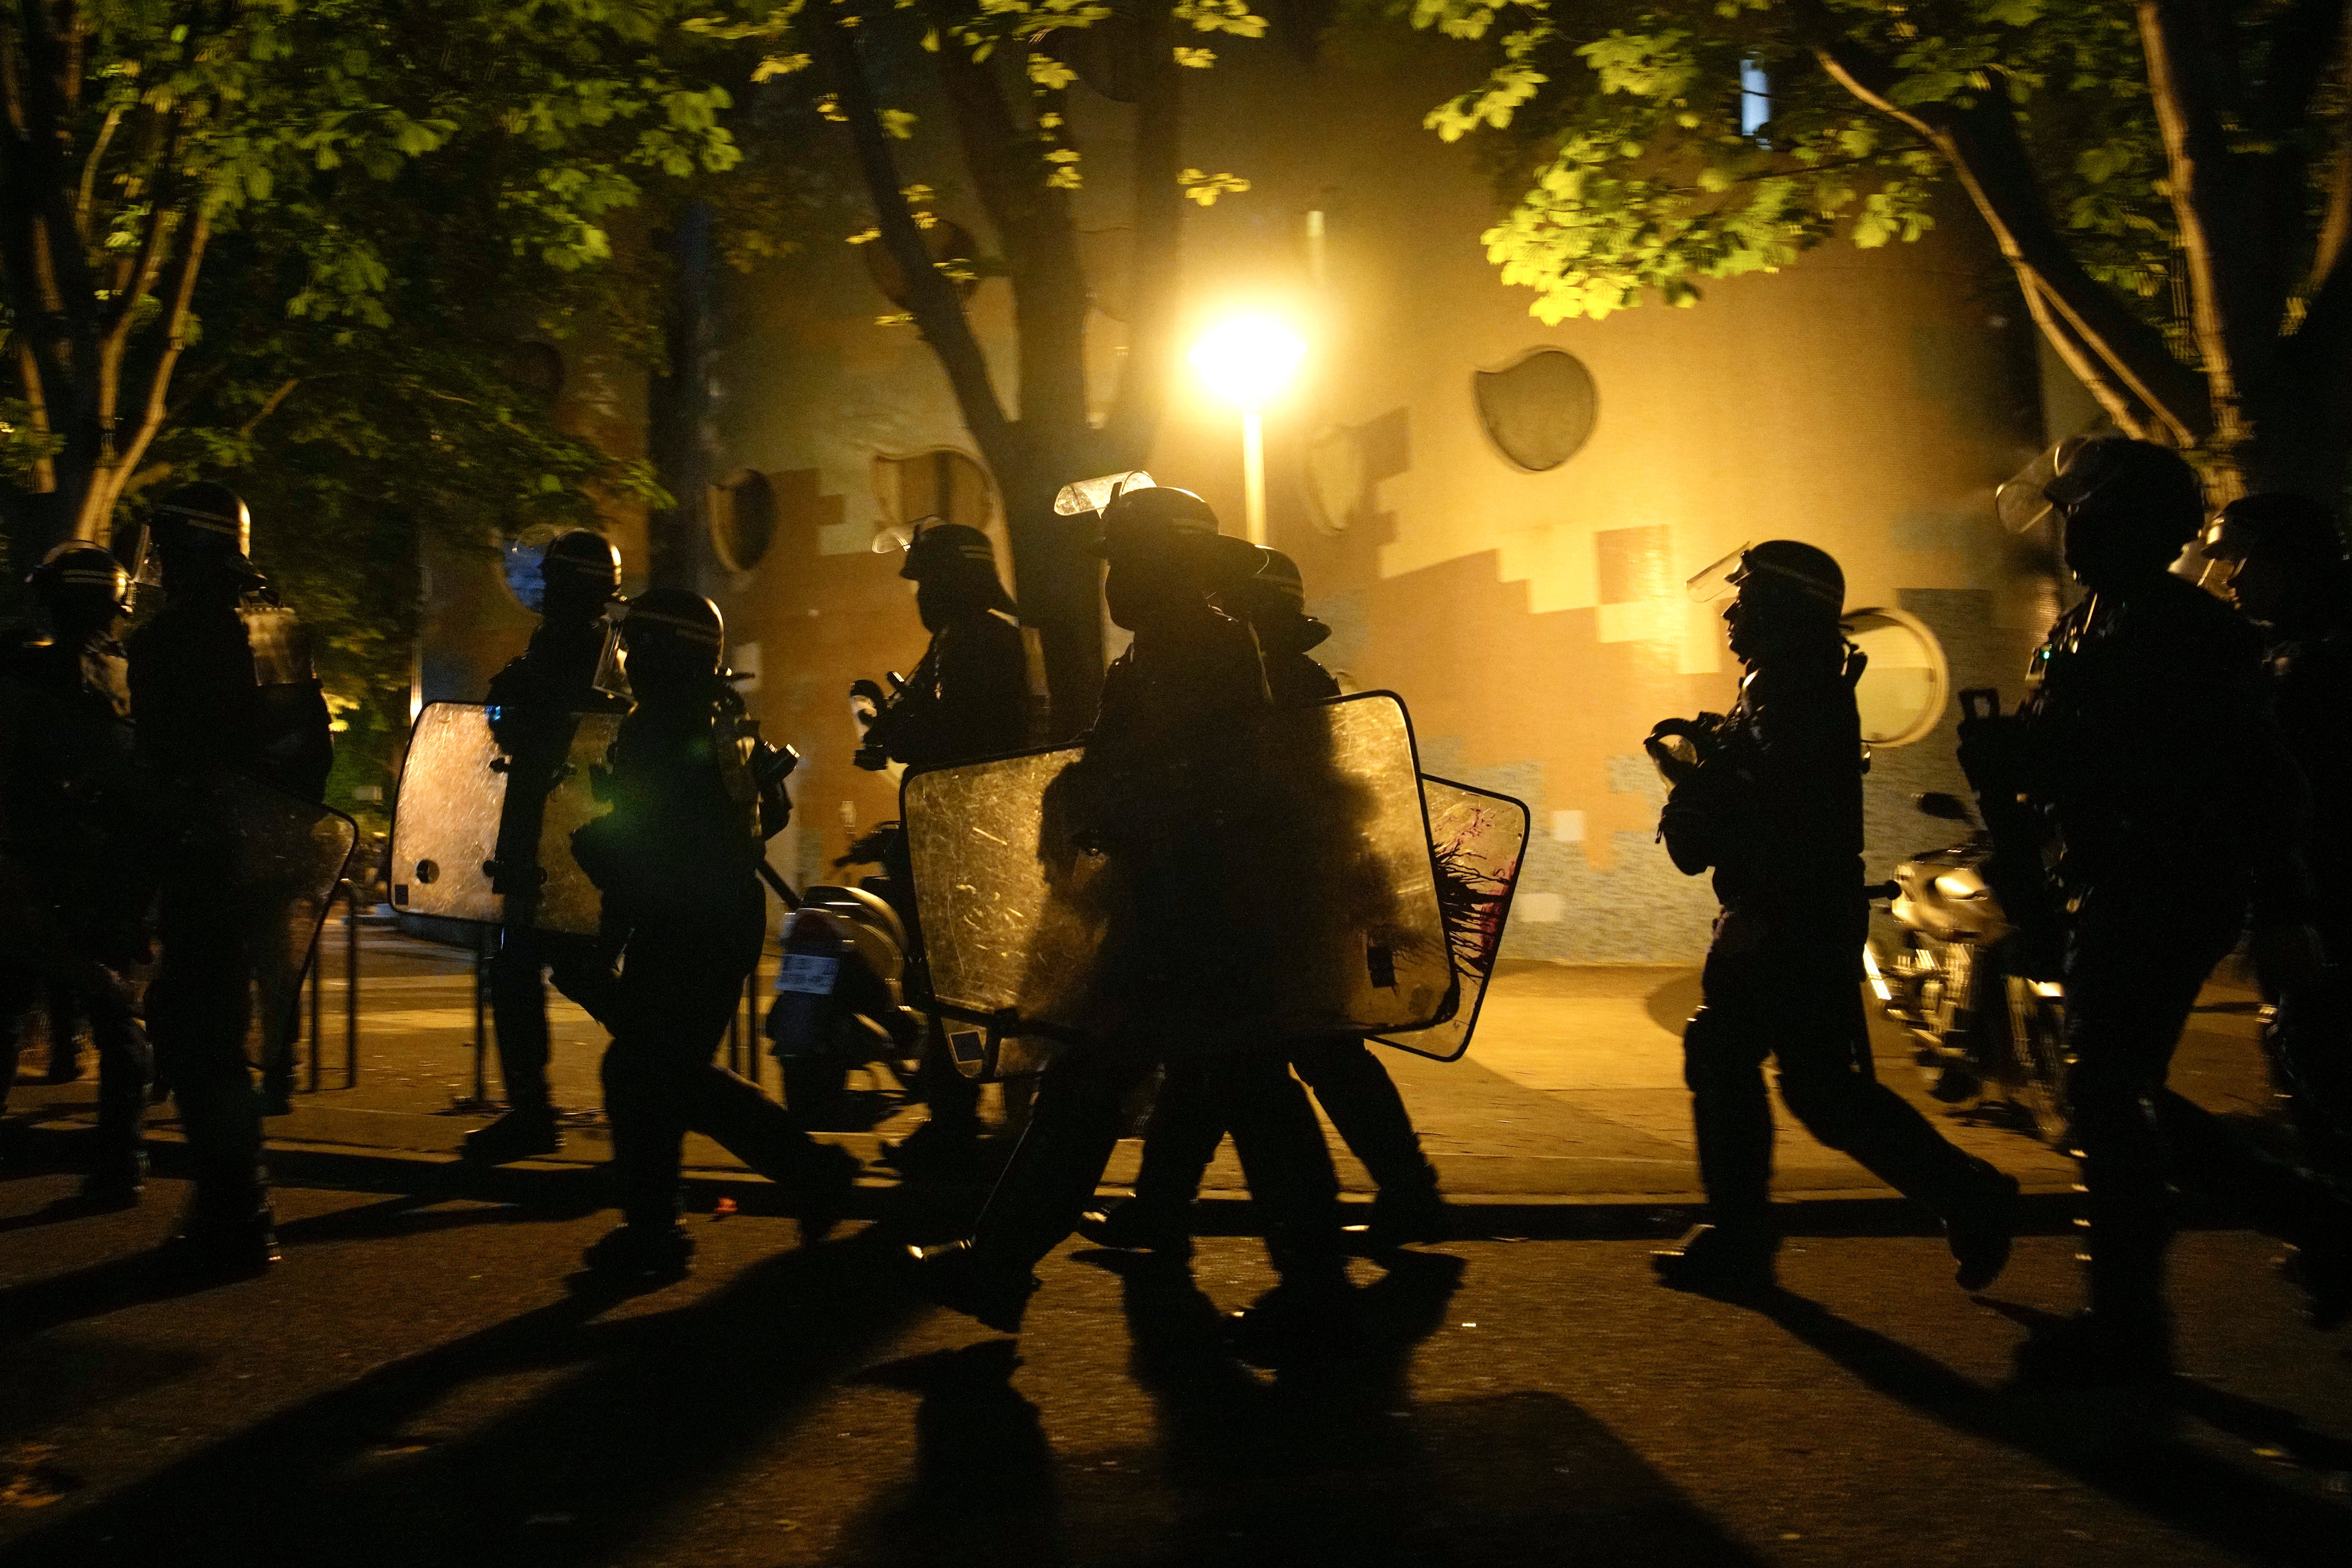 A group of police officers walk during a protest in Nanterre, outside Paris on Saturday